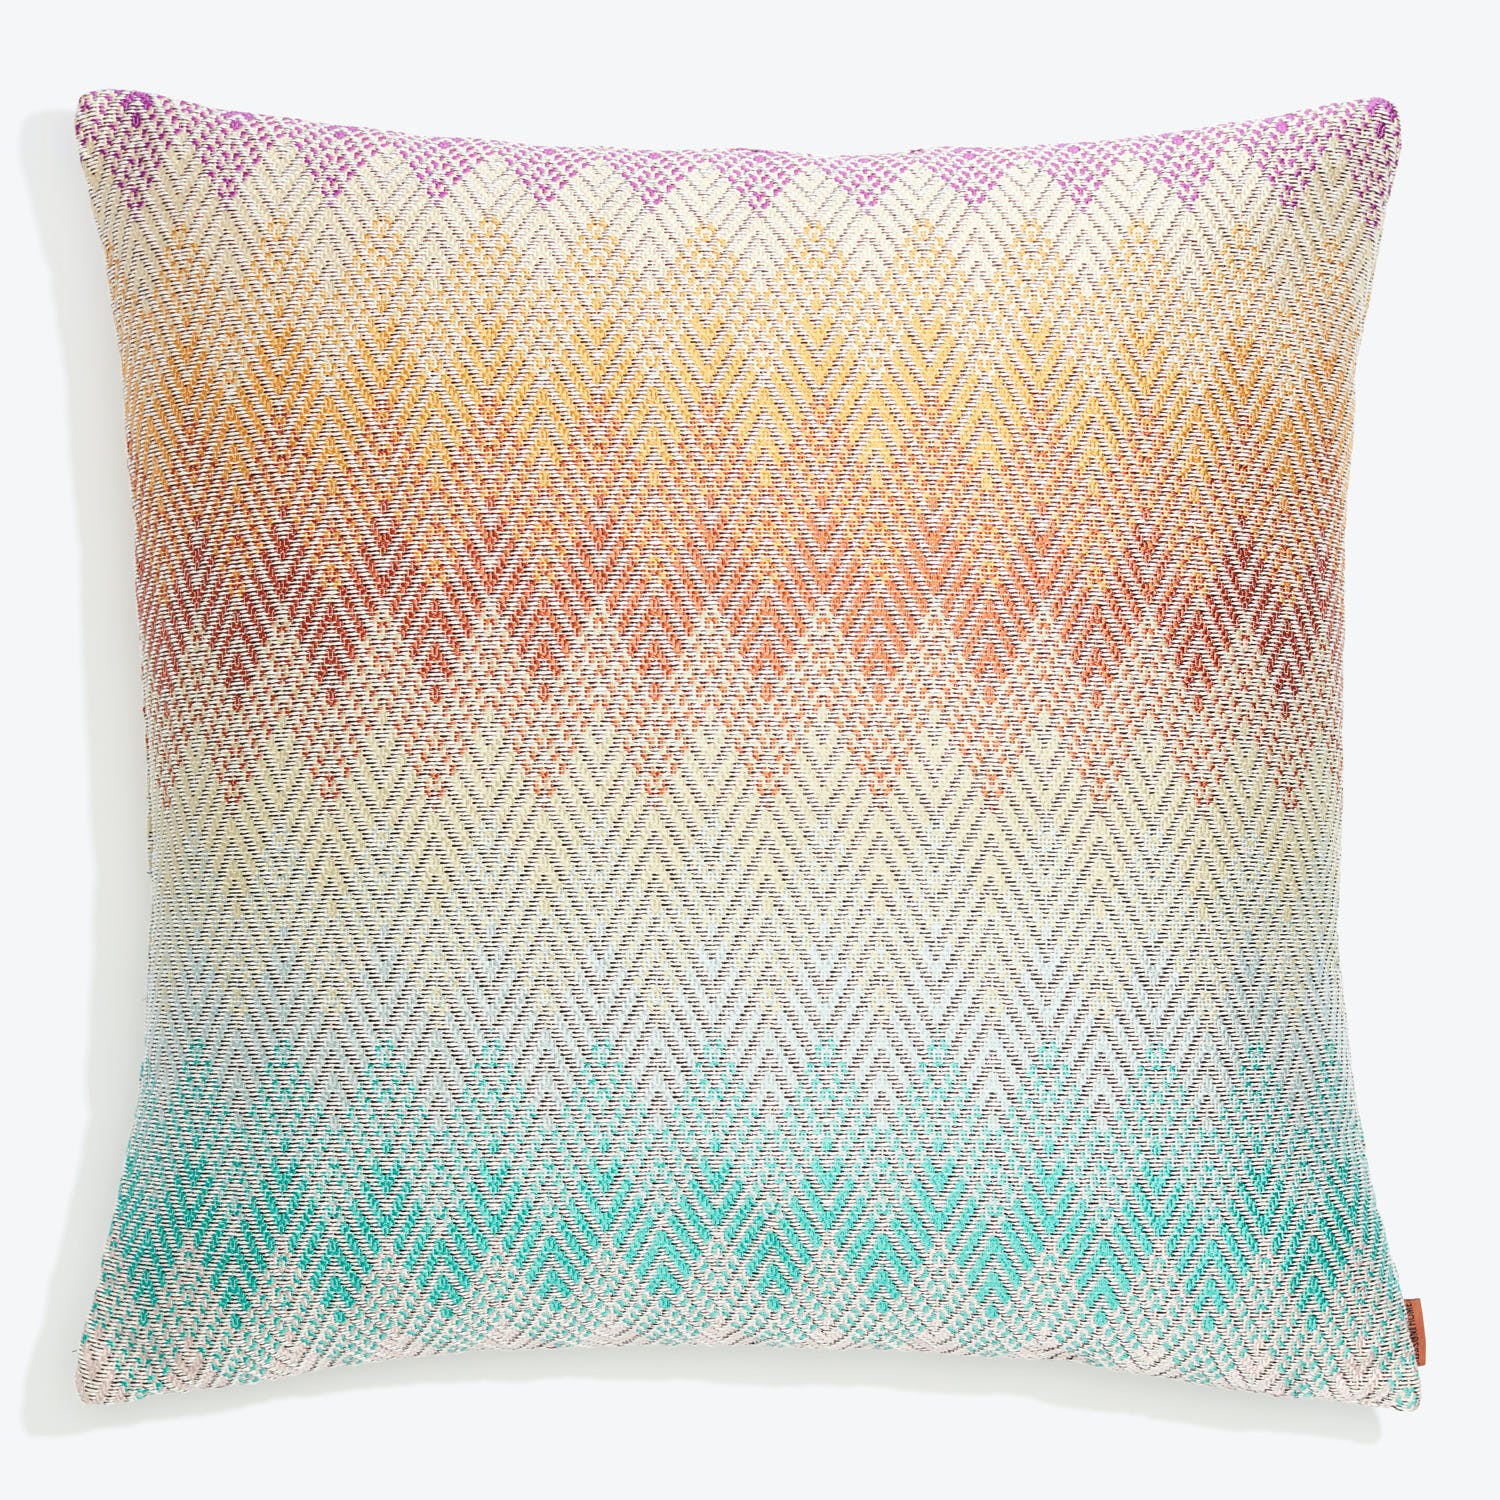 Vibrant and cozy decorative pillow with textured chevron pattern.